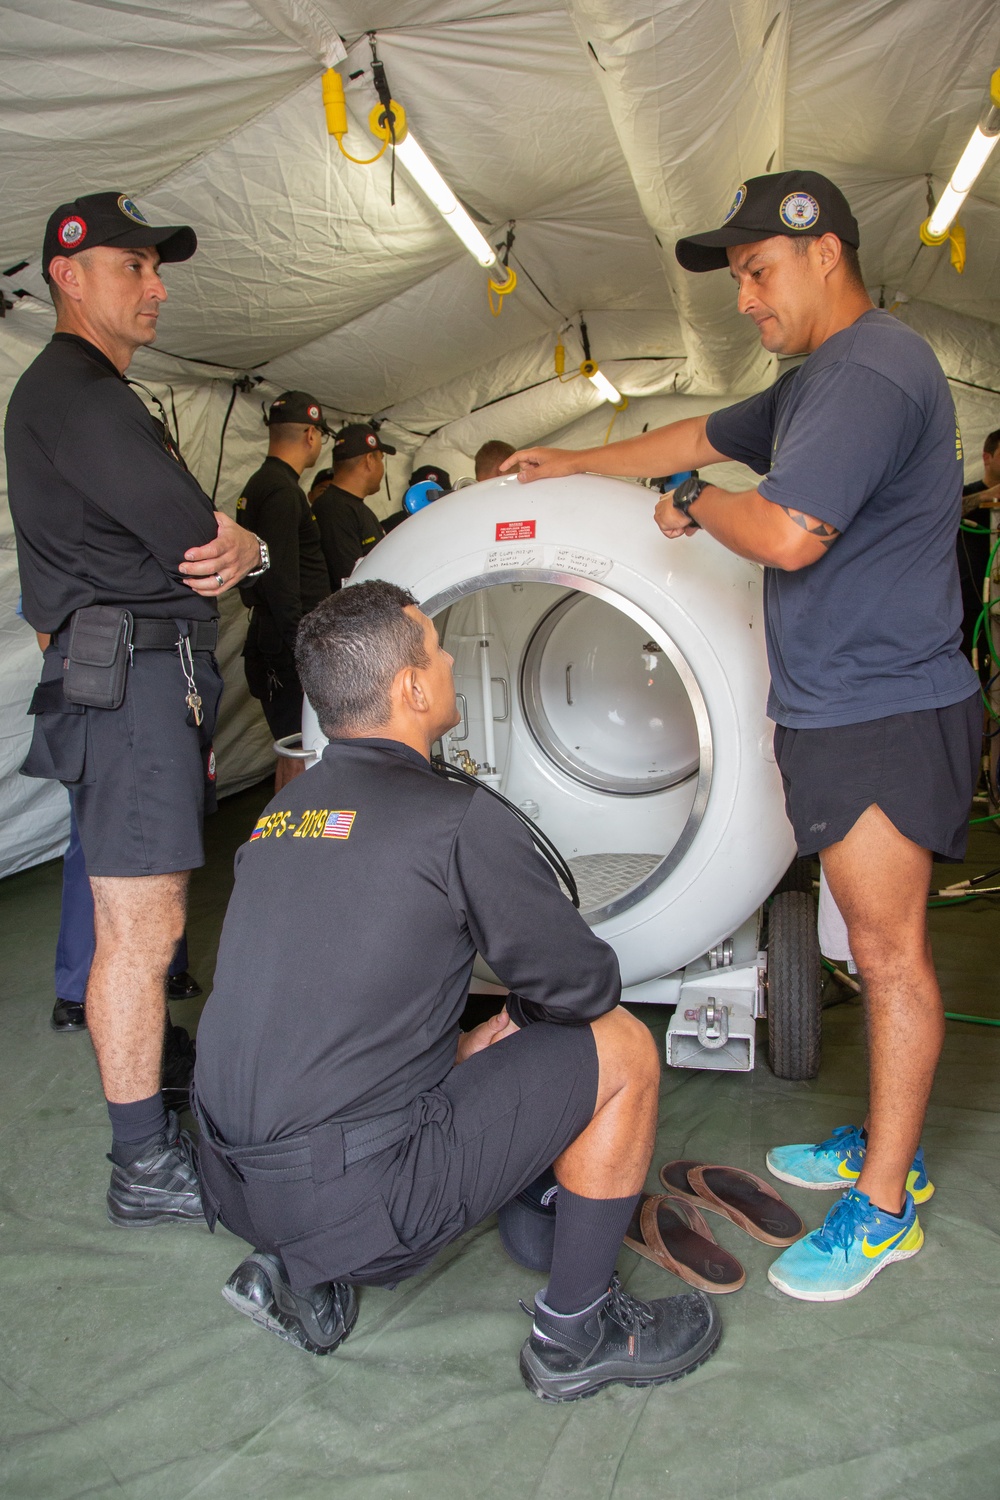 U.S. Navy Promotes Dive Capabilities in Colombia